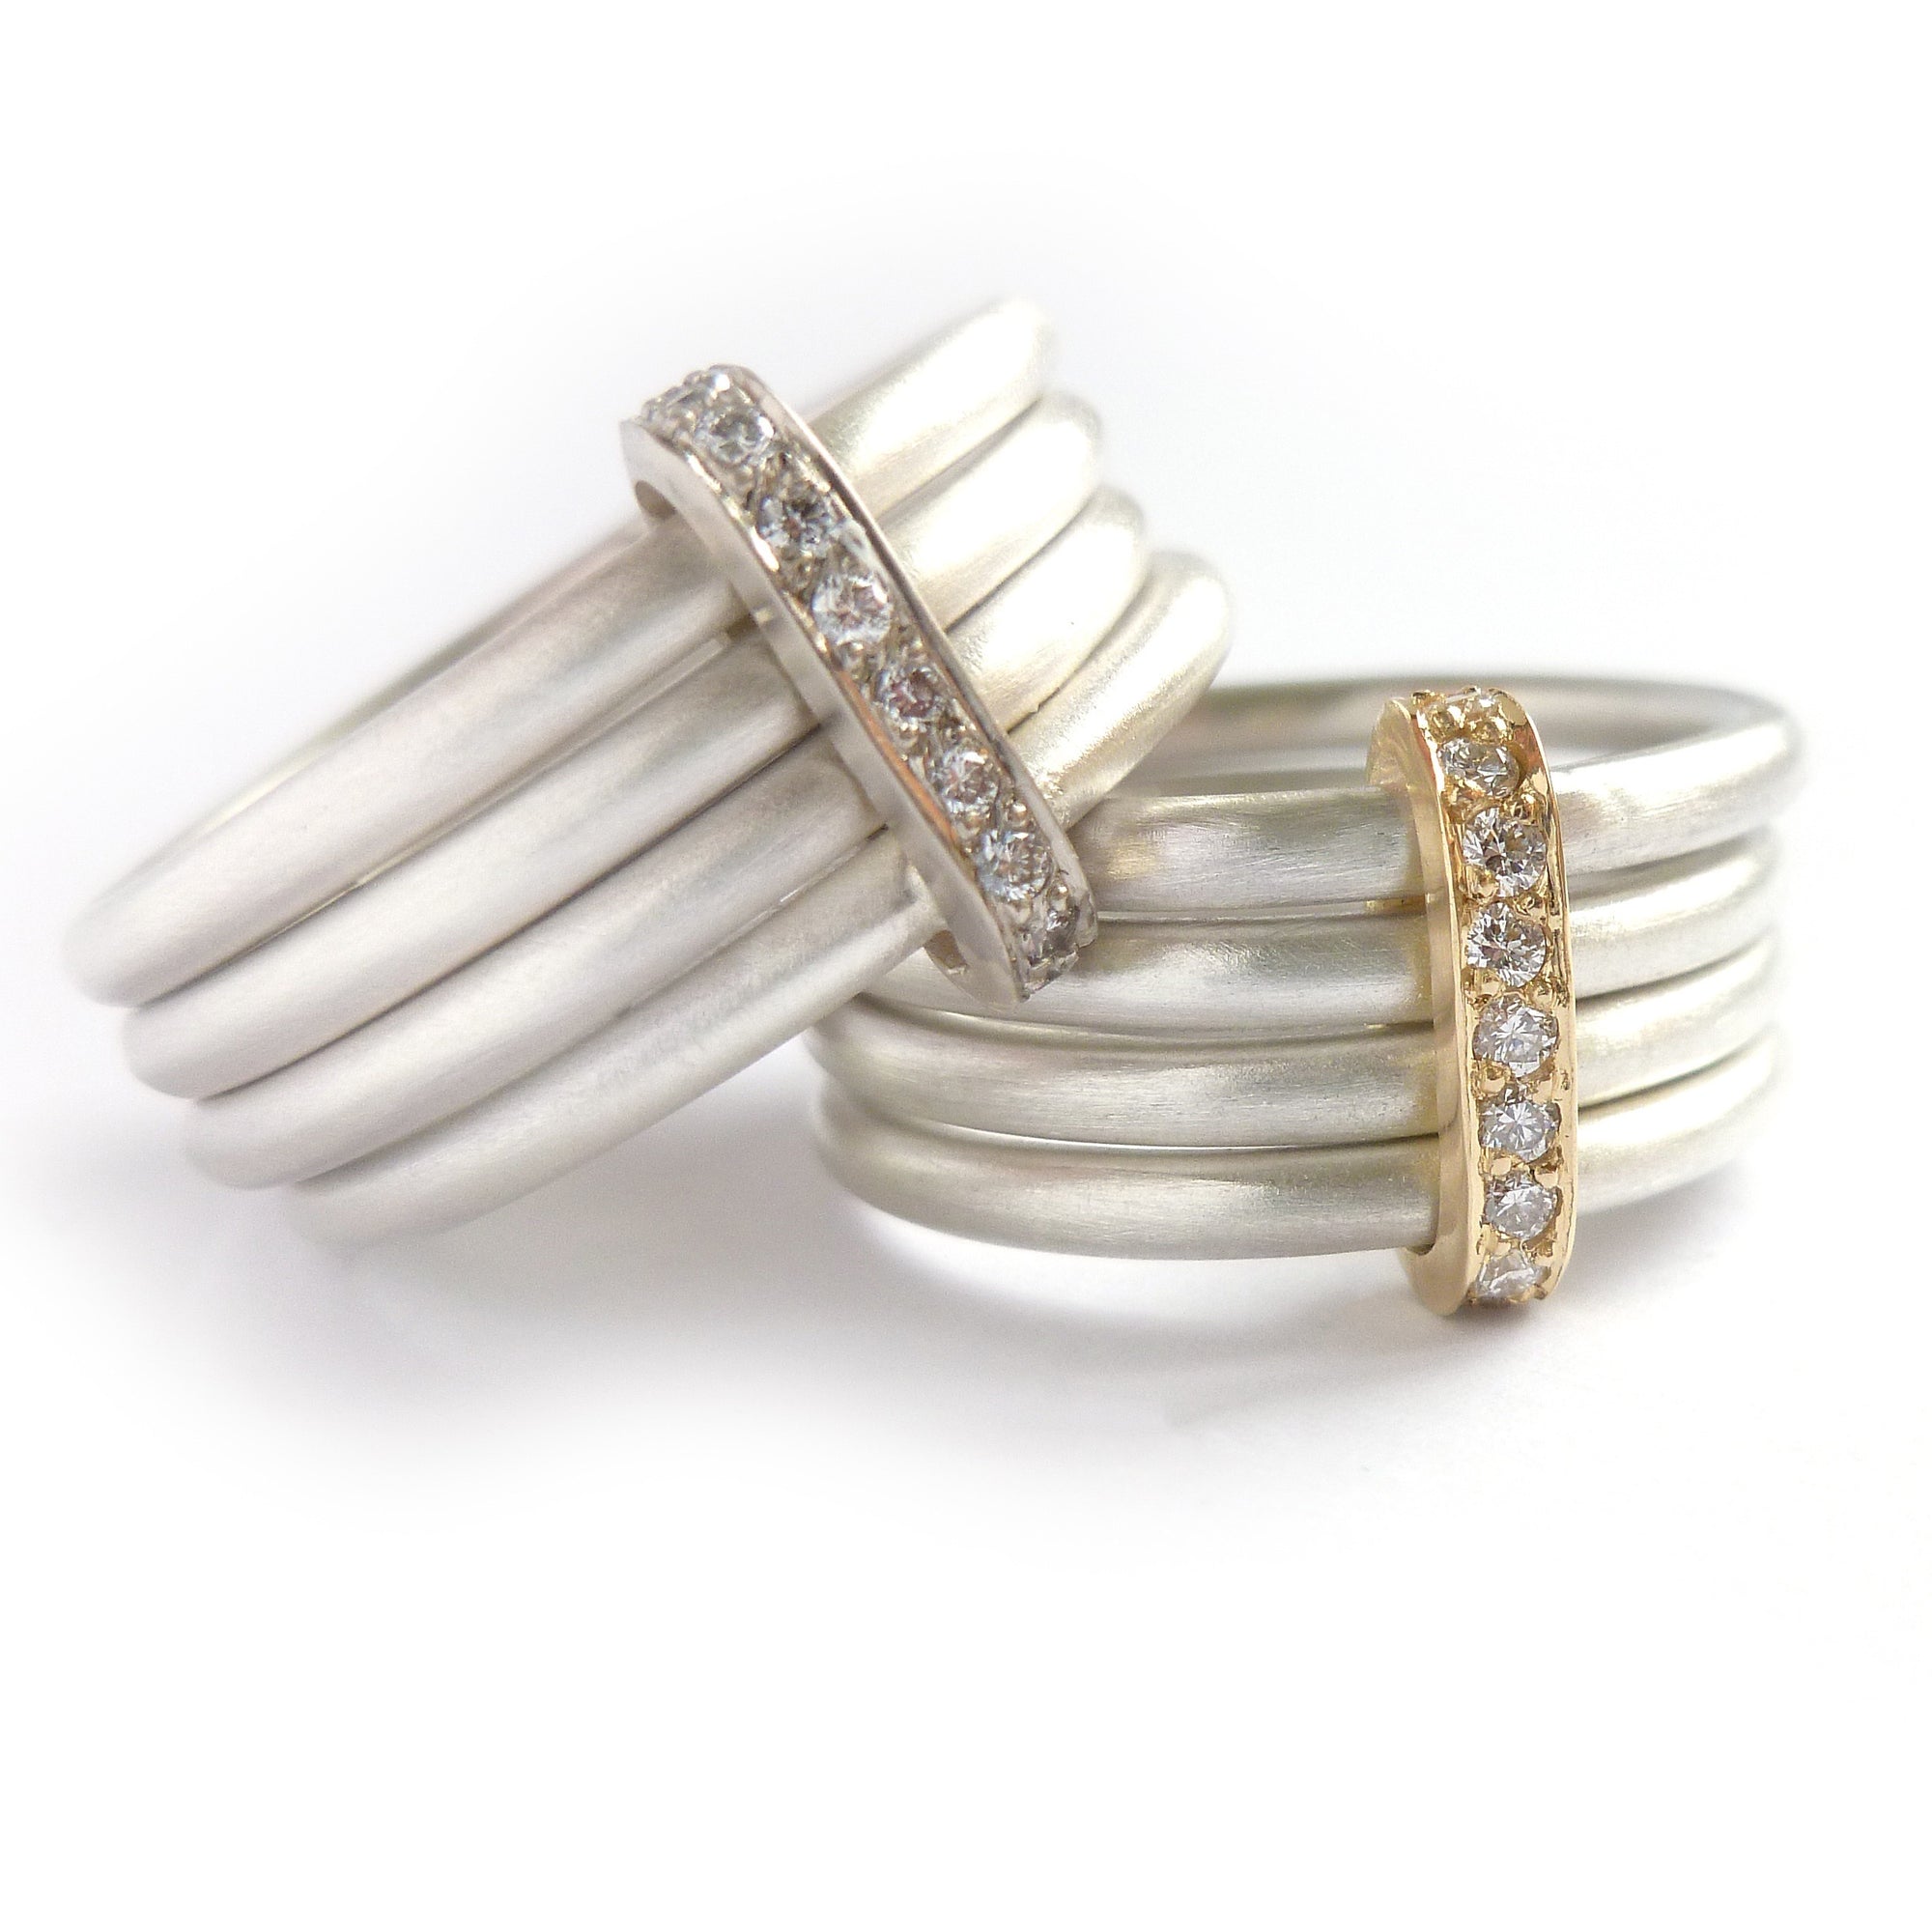 Unique contemporary wide band silver and gold ring with white diamonds